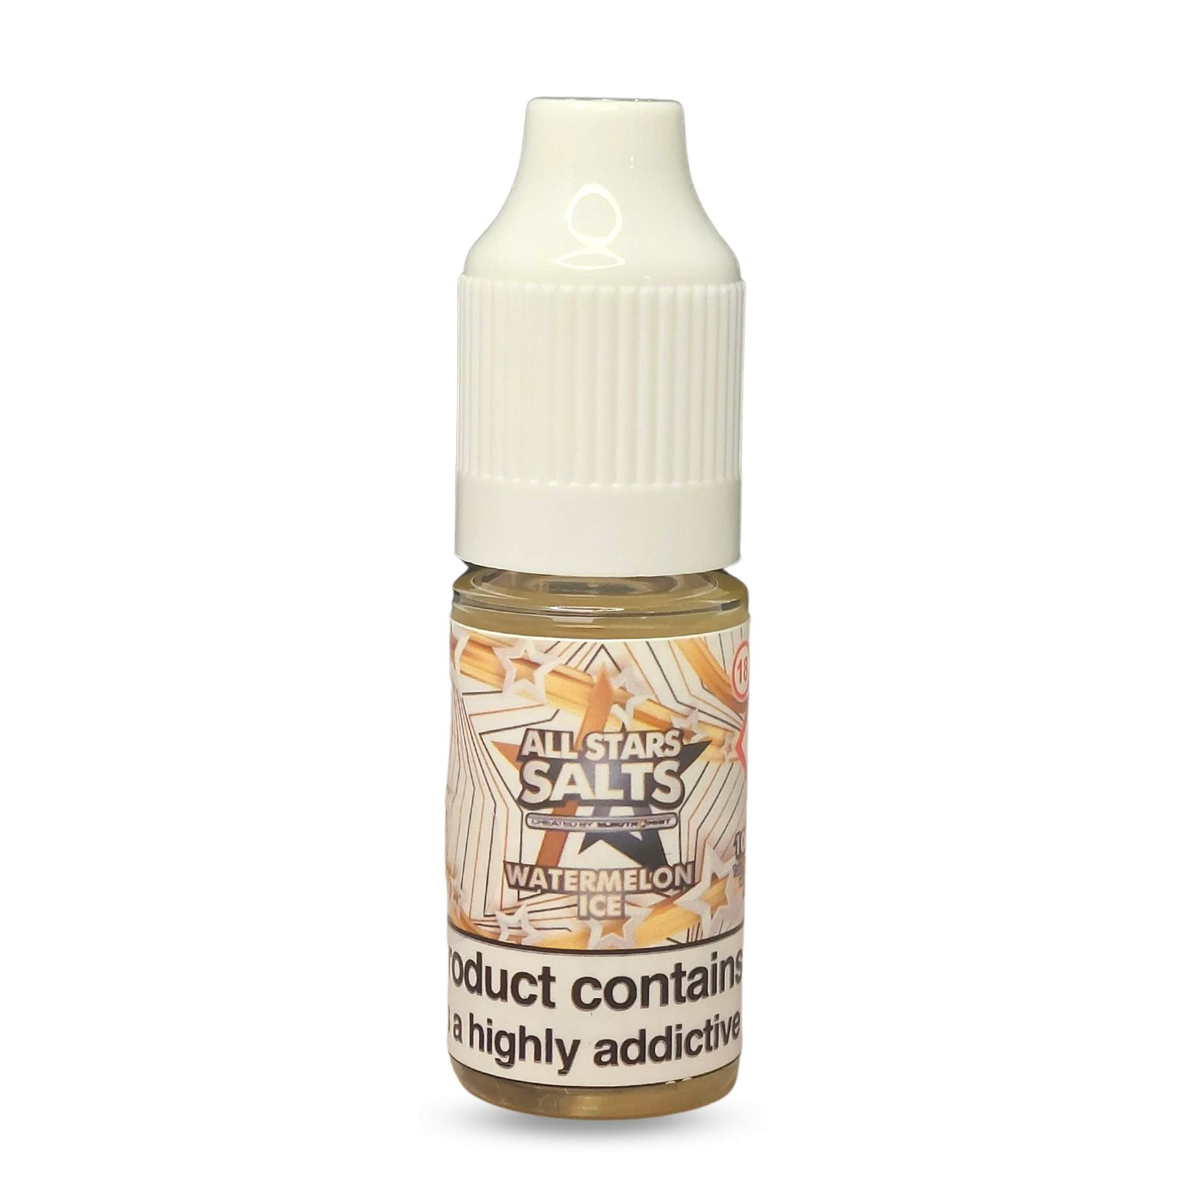 All Stars Salts from the vape brand you can trust, Electromist. Get your taste buds ready for a flavour sensation, Watermelon Ice. Nicotine Content: 6mg/12mg/18mg Products may contain nicotine. For over 18s Only ejuice, vape pen, eliquid, e cigarette, 10ml, vaping, cloud, PG, VG, 60/40, vape liquid, Flavour, TPD